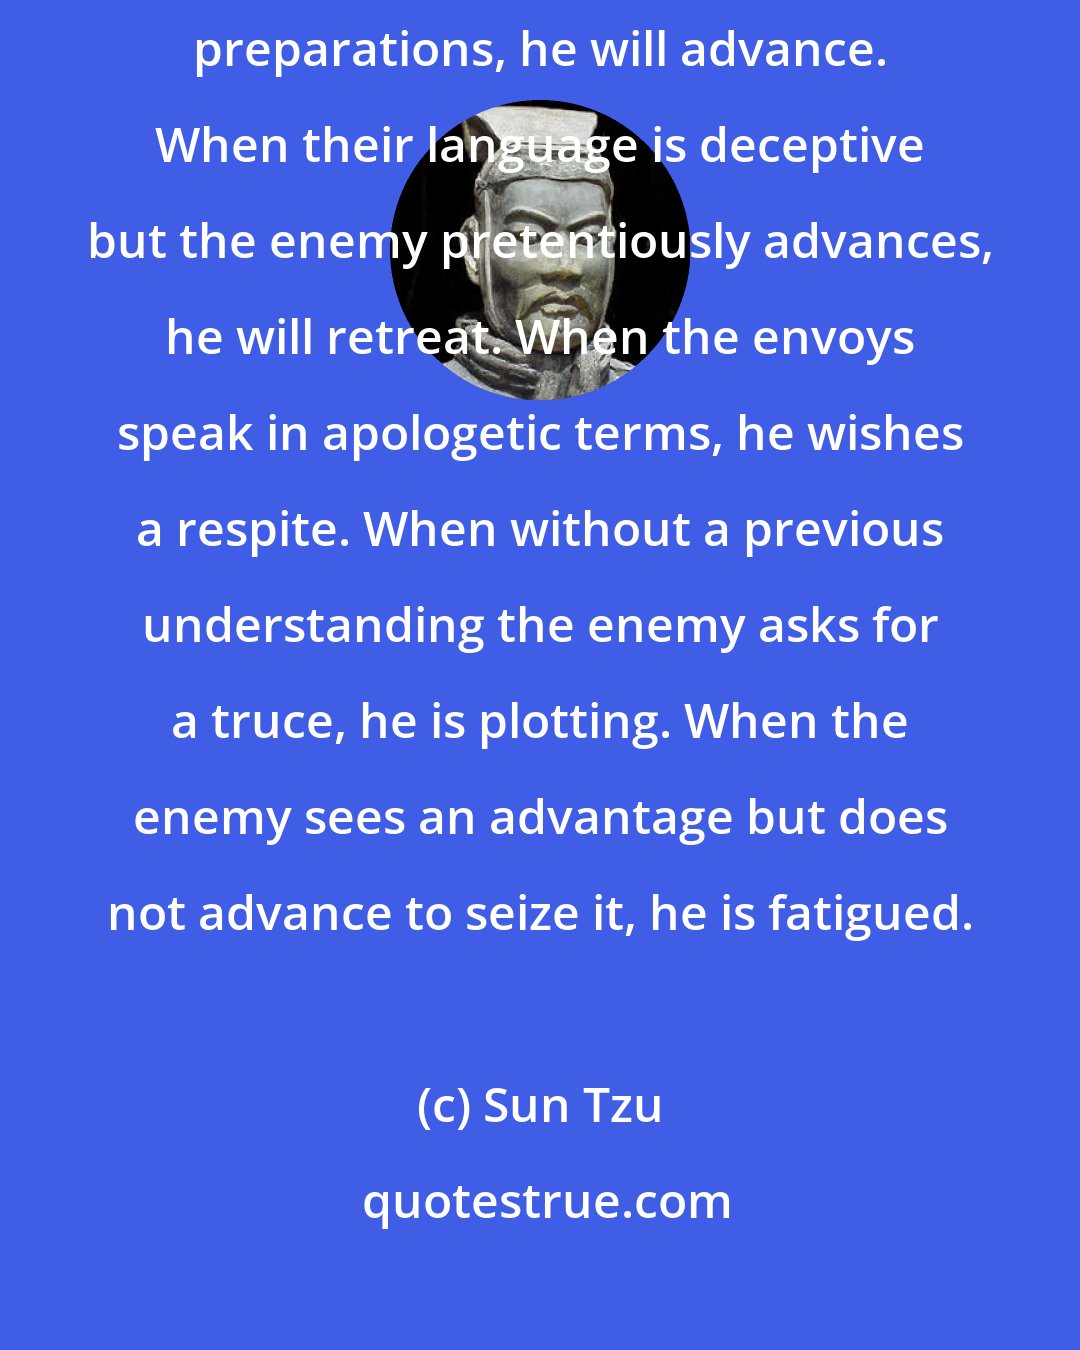 Sun Tzu: When the enemy's envoy's speak in humble terms, but continues his preparations, he will advance. When their language is deceptive but the enemy pretentiously advances, he will retreat. When the envoys speak in apologetic terms, he wishes a respite. When without a previous understanding the enemy asks for a truce, he is plotting. When the enemy sees an advantage but does not advance to seize it, he is fatigued.